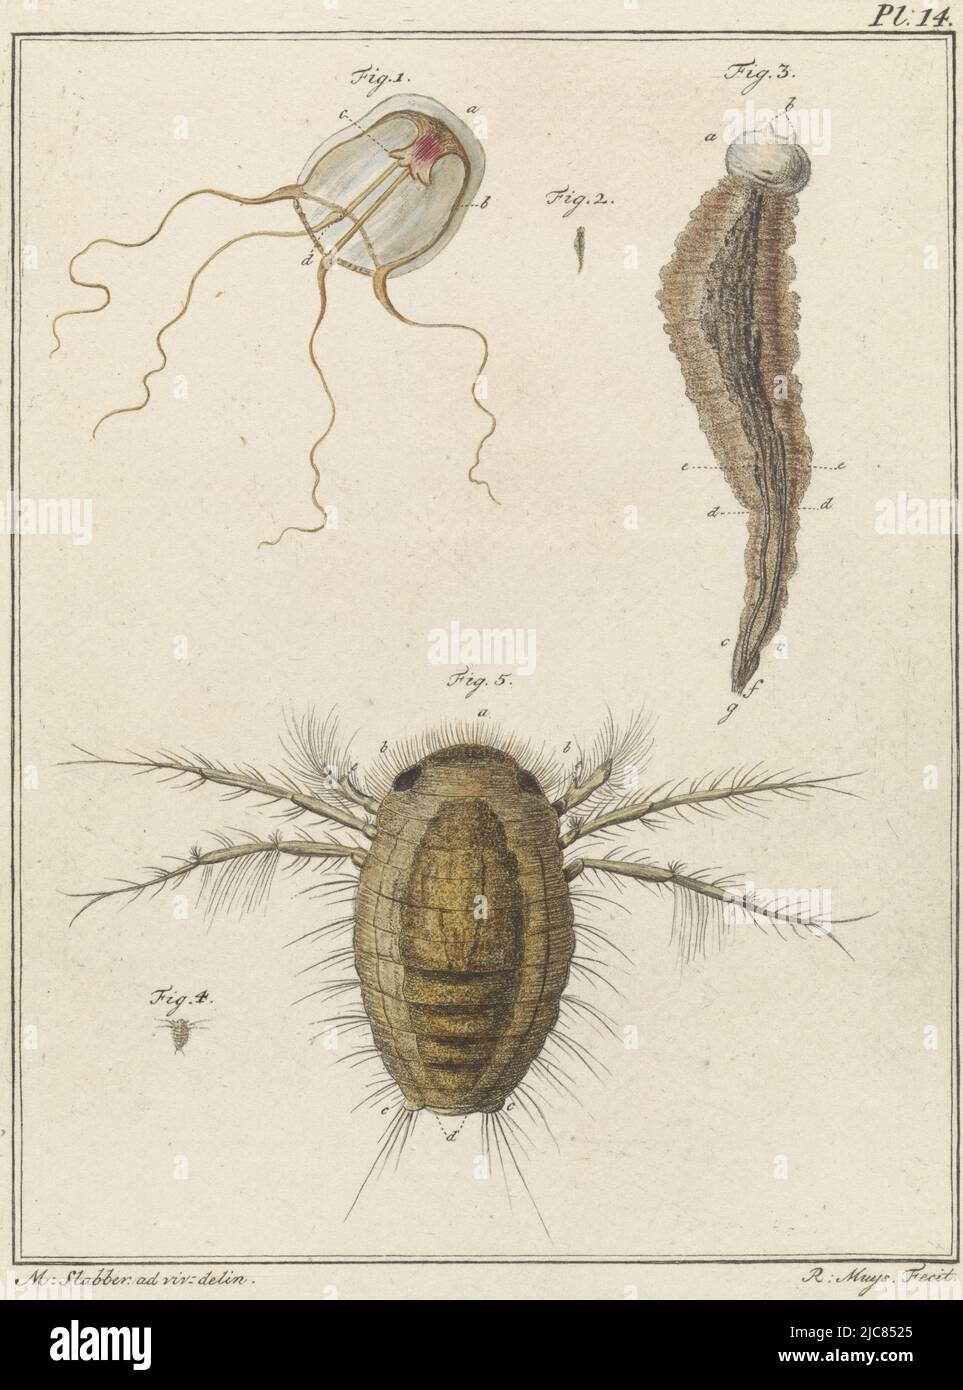 Marine Animals. Figure 1 shows a polyp jellyfish. Figures 2 and 3 show a sucker worm at full size and enlarged. Figures 4 and 5 show an isopod species full size and enlarged. Top right: Pl. 14. Print from a book on domestic and foreign land and aquatic animals, Various marine animals, print maker: Robbert Muys, (mentioned on object), intermediary draughtsman: Martinus Slabber, (mentioned on object), Rotterdam, 1778, paper, etching, h 204 mm × w 155 mm Stock Photo